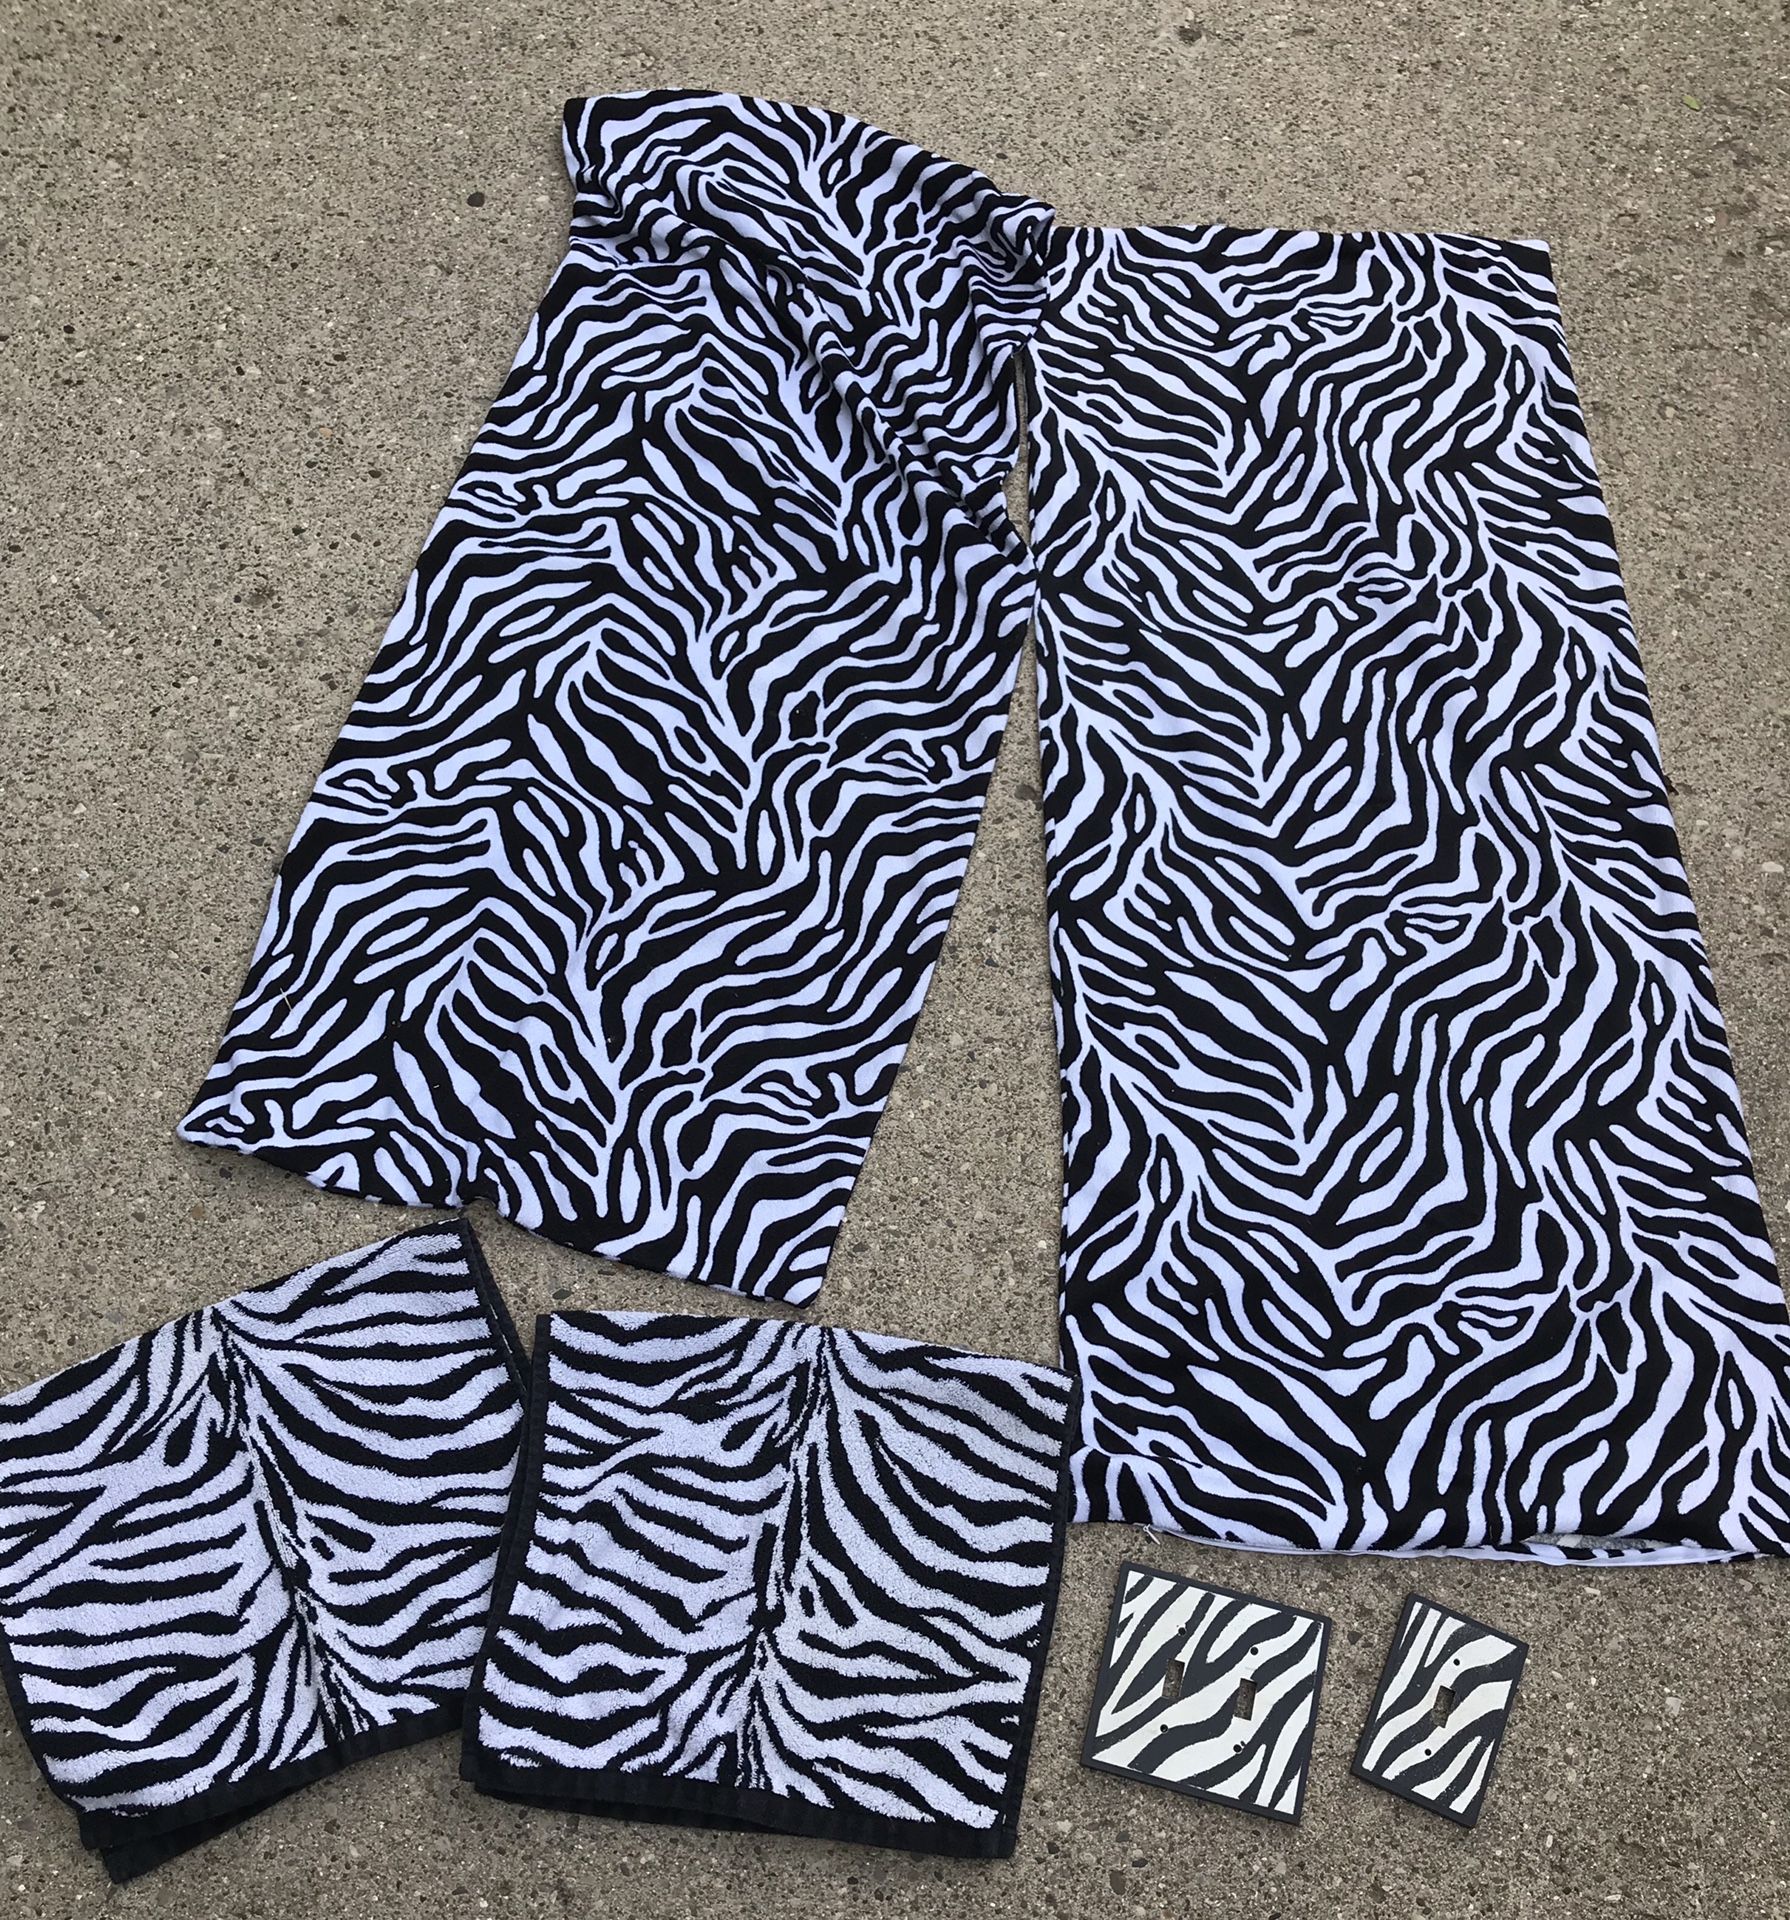 Zebra print!! 2 body pillow cases, 2 hand towels, 2 light switch covers